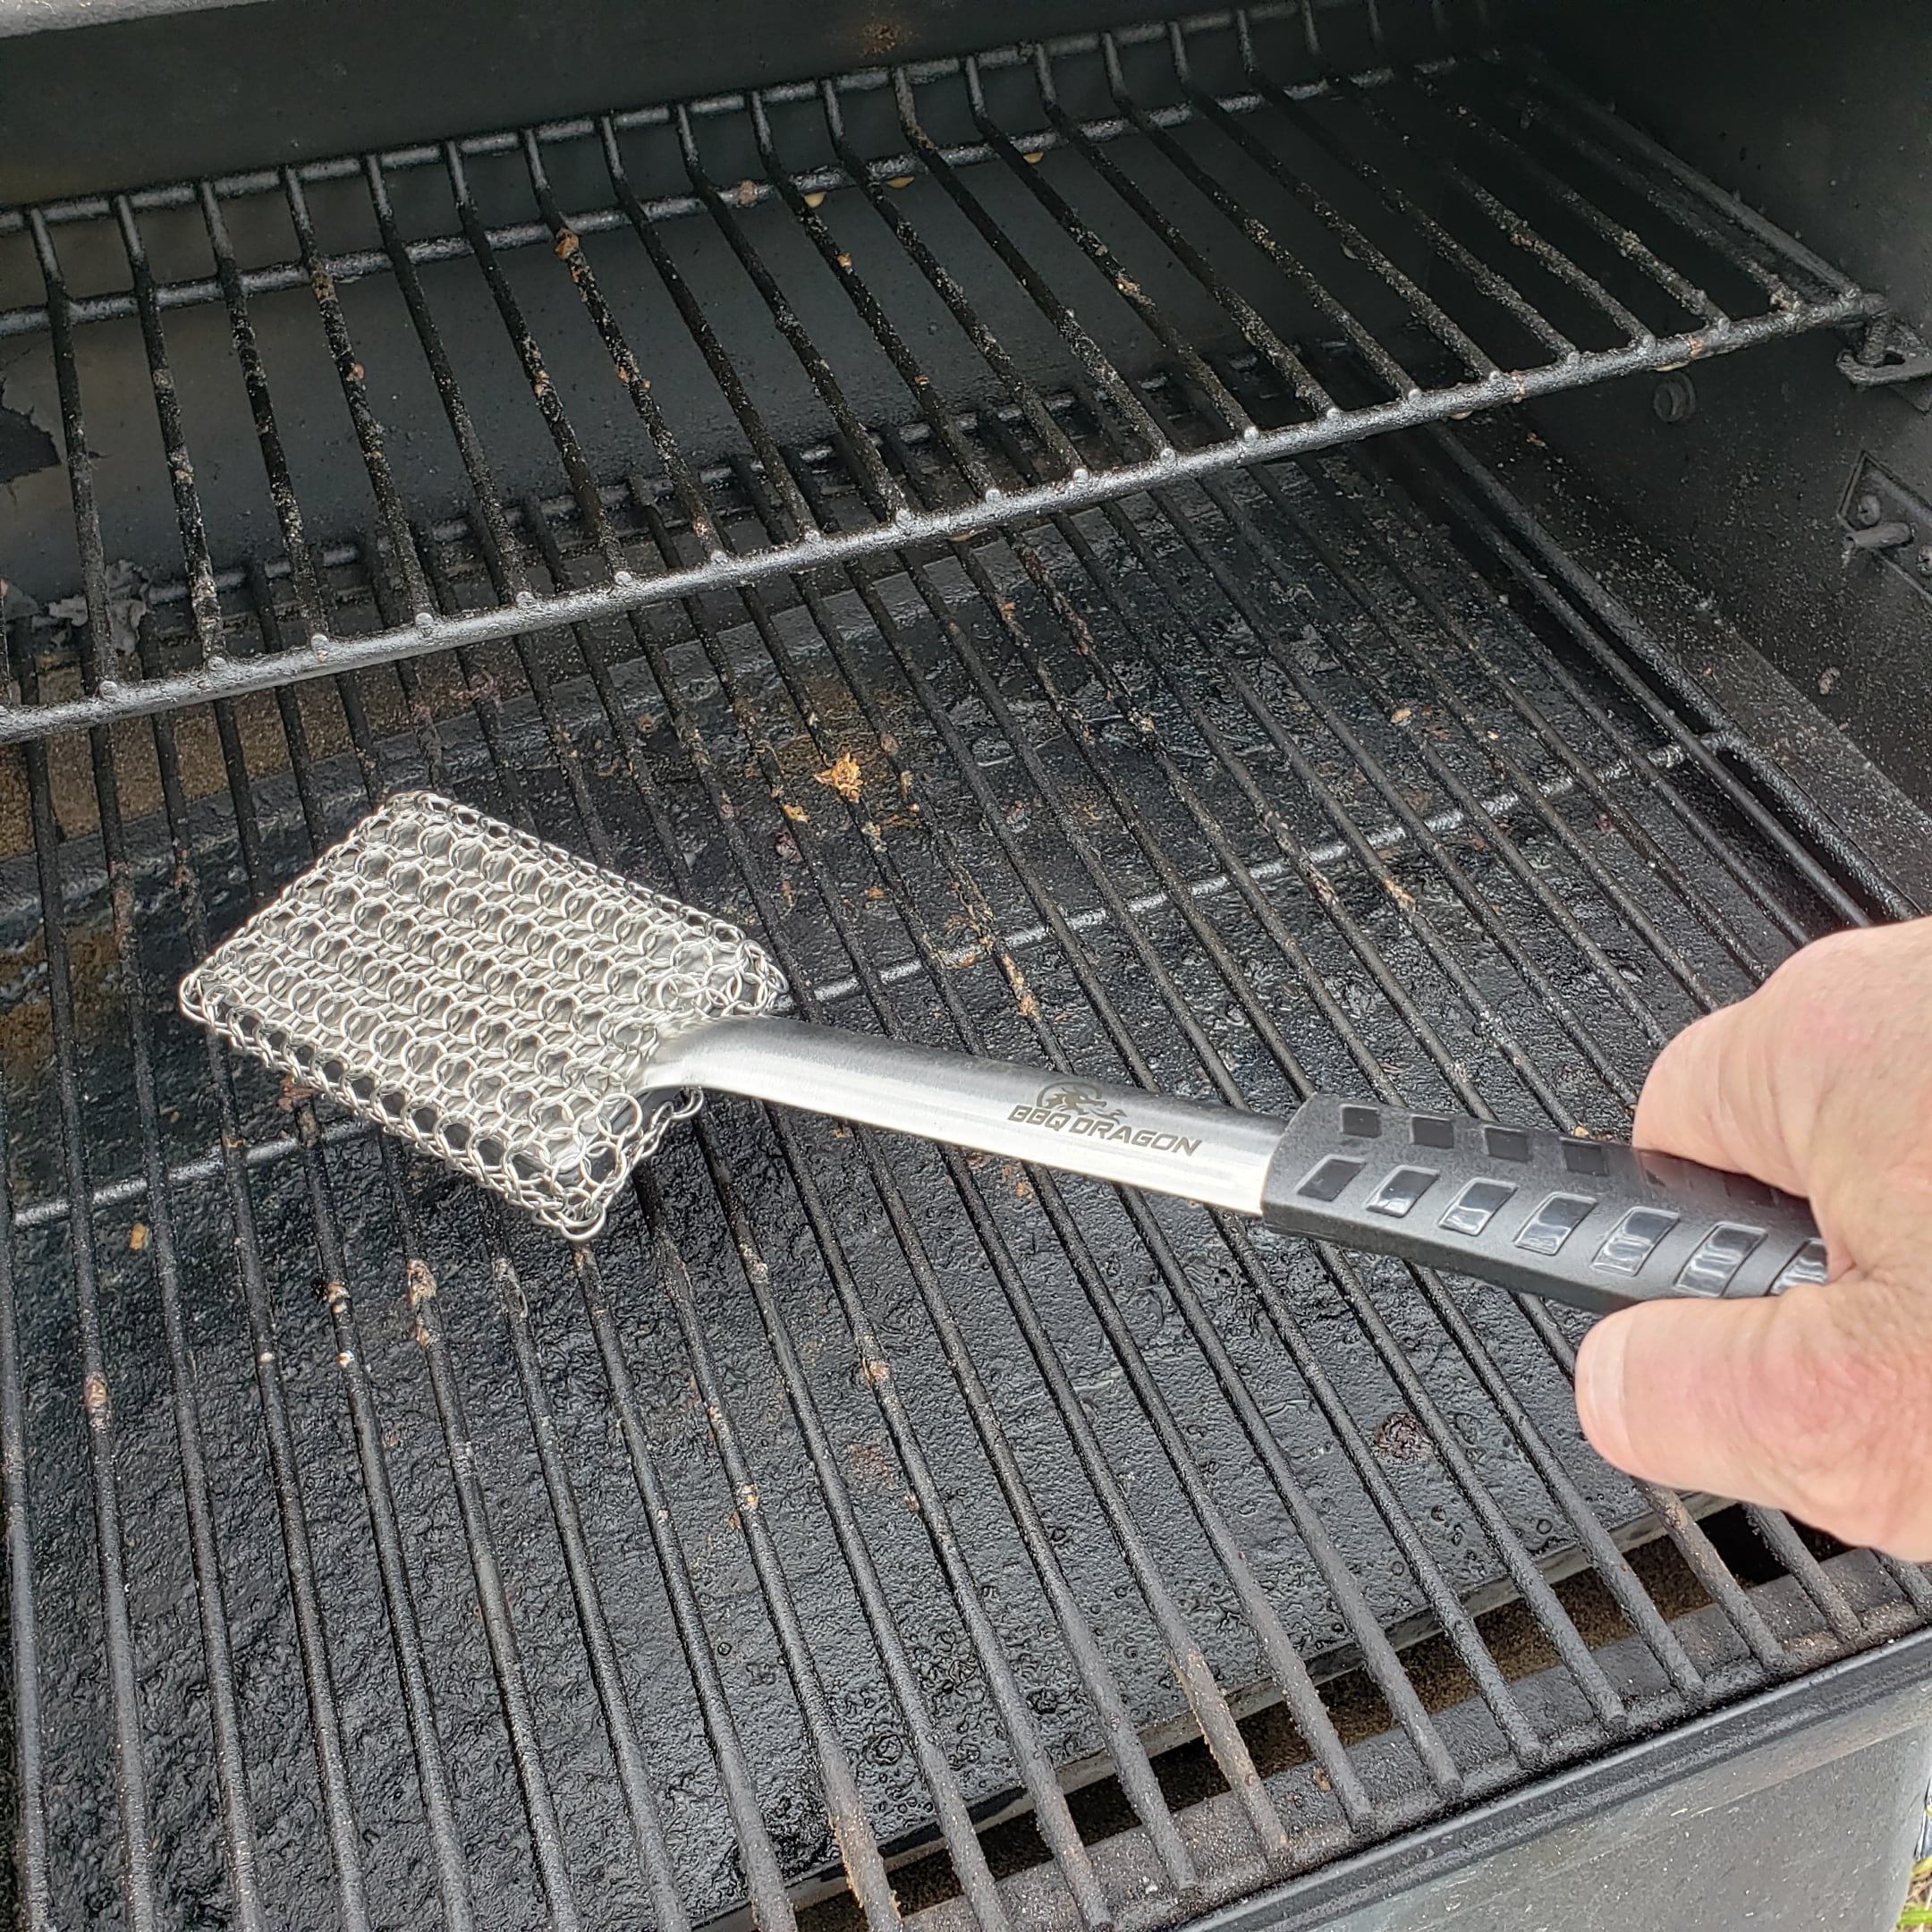 Grill Rescue brush review: A safe wireless grill brush - Reviewed